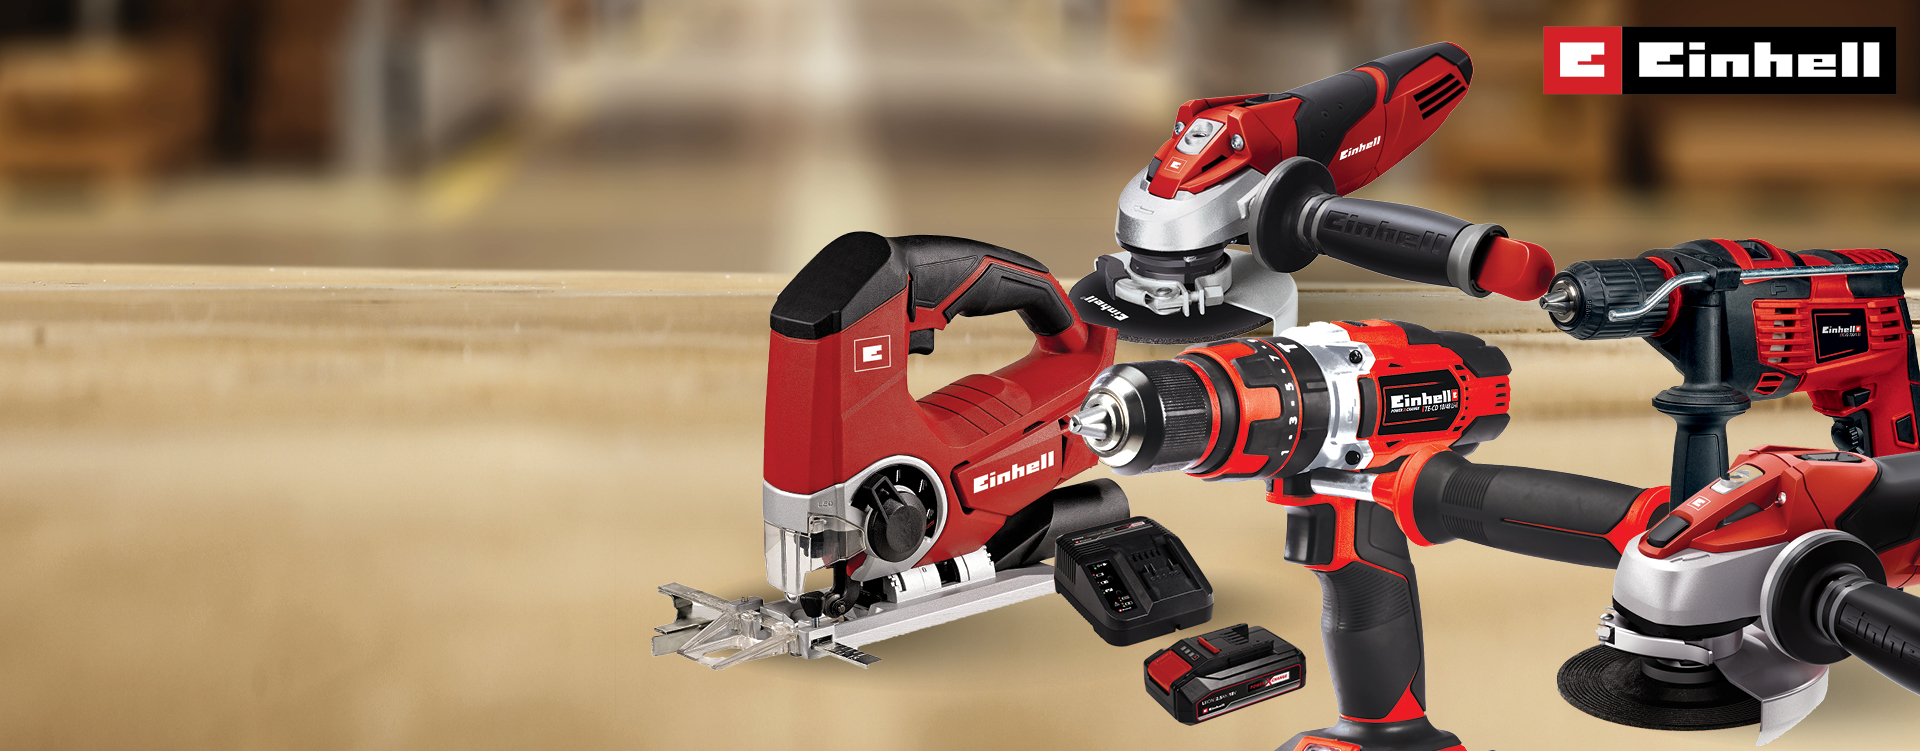 THE EINHELL RANGE. Setting new standards in performance for all your DIY projects.